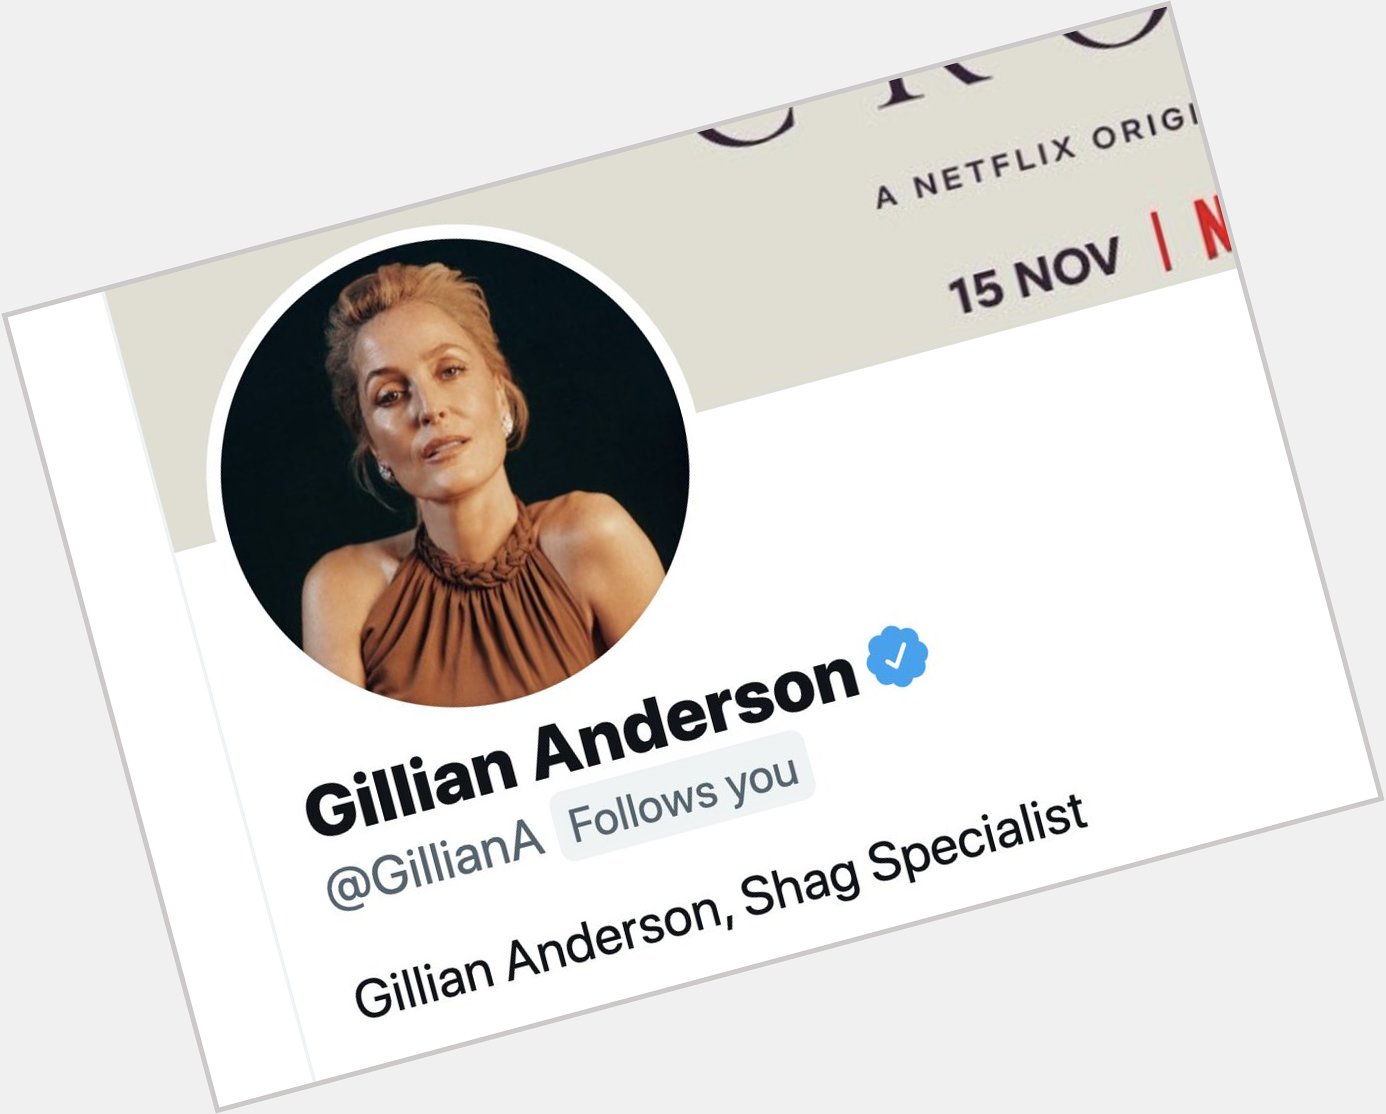 Happy birthday to the one and only Gillian Anderson, Shag Specialist. 